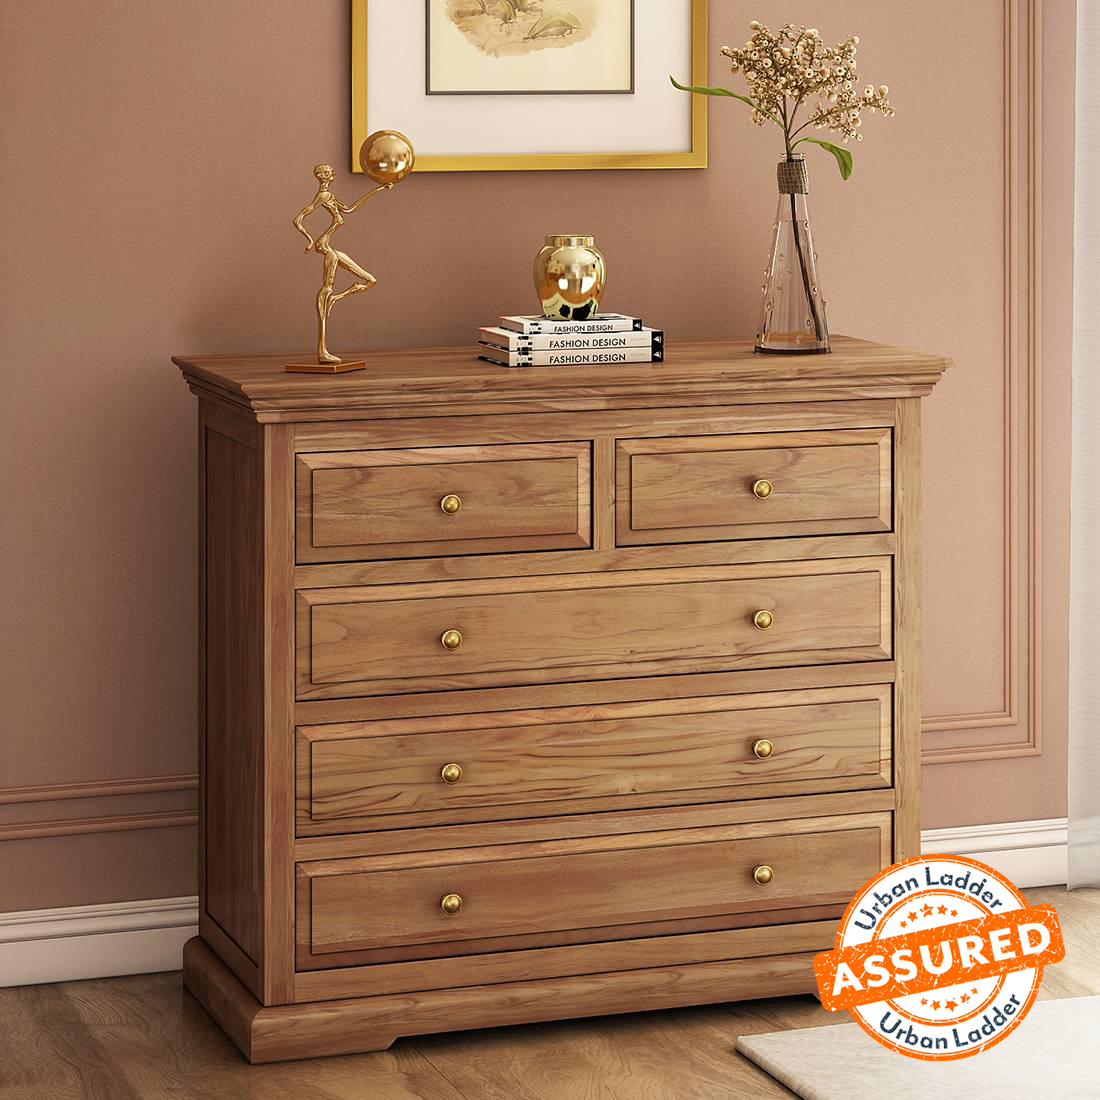 Chest of Drawers - Buy Solid Wooden Chest of Drawers Online in